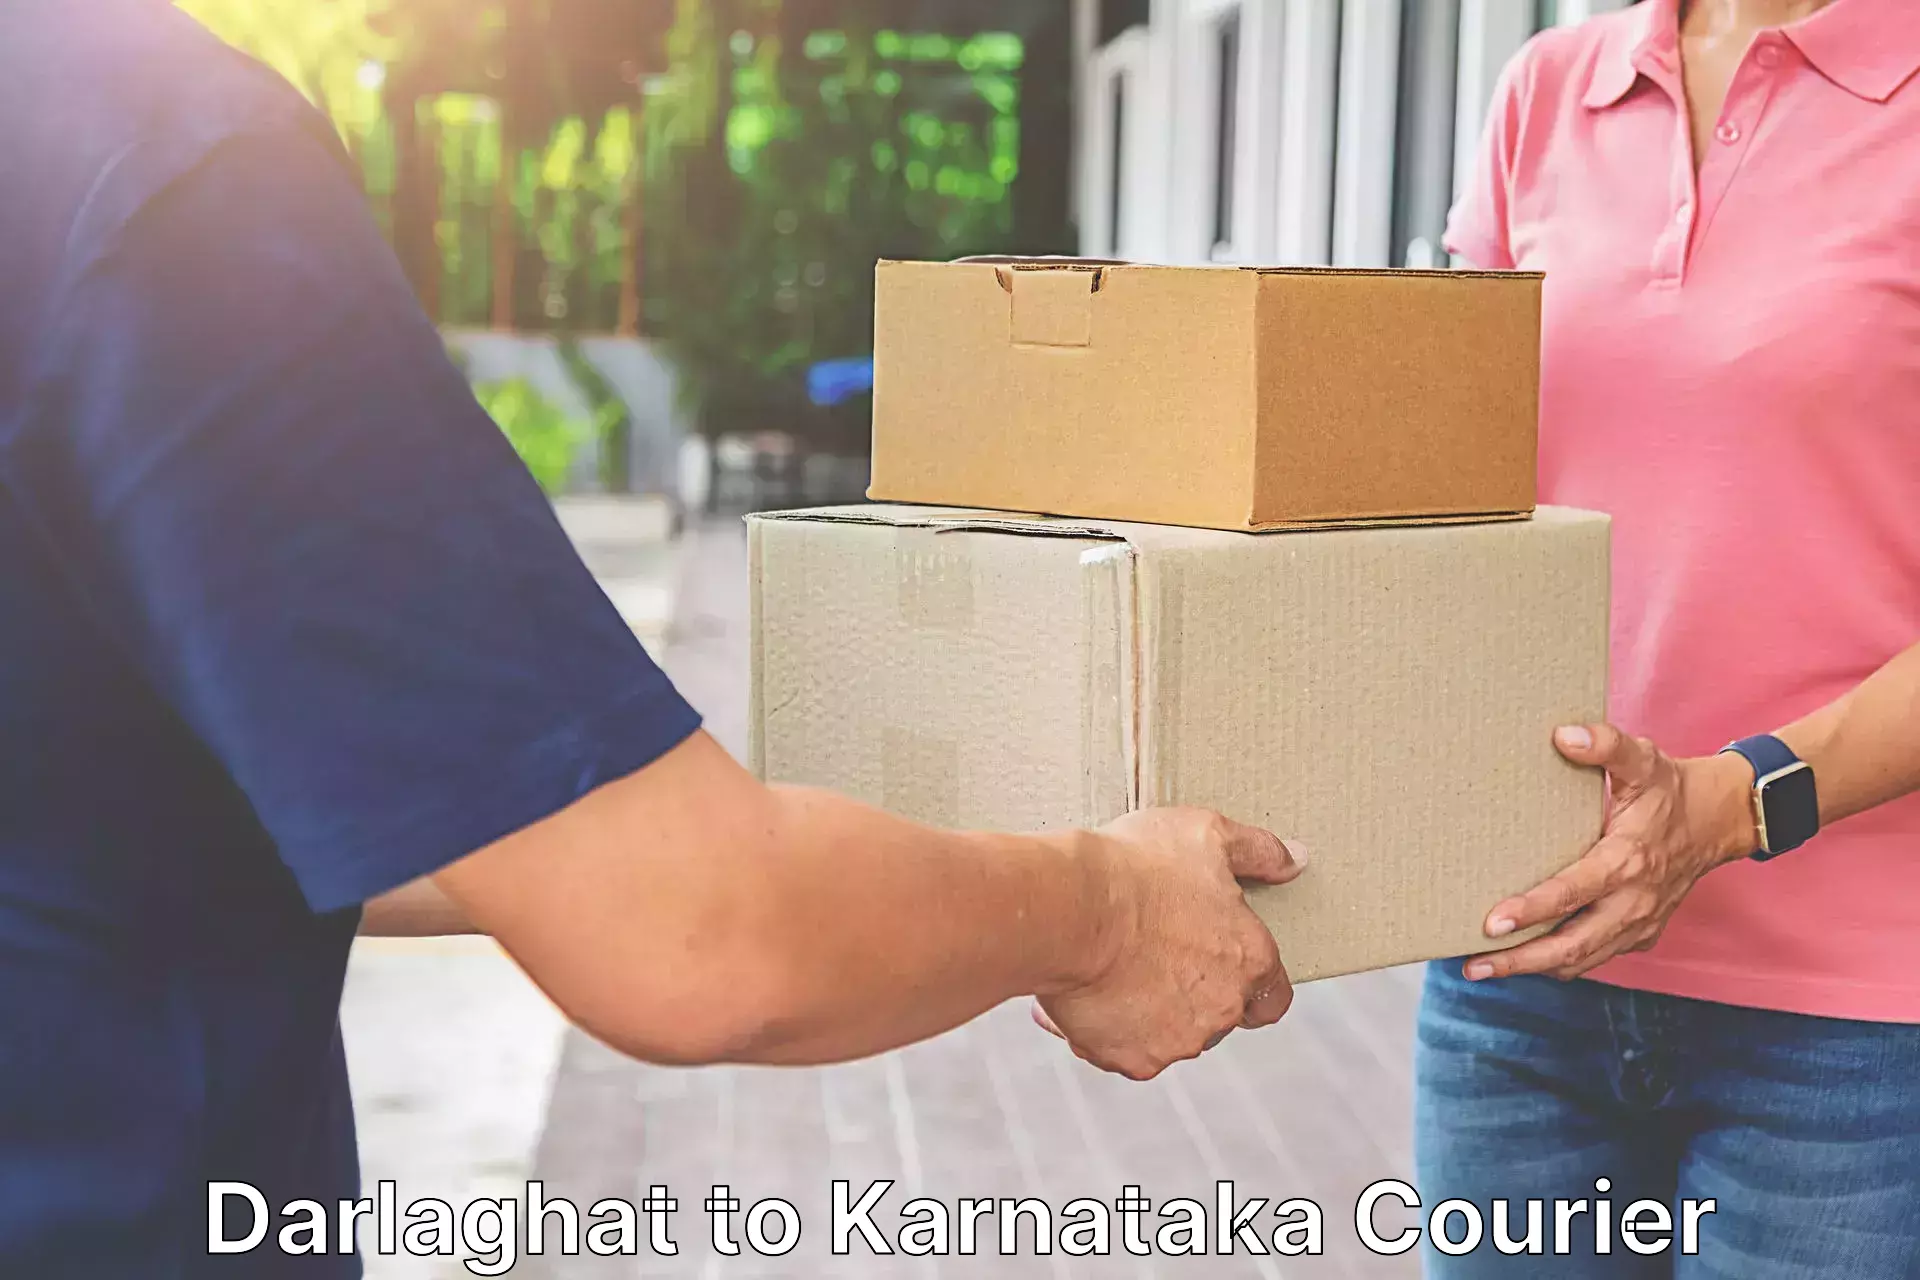 Courier service partnerships Darlaghat to Bengaluru